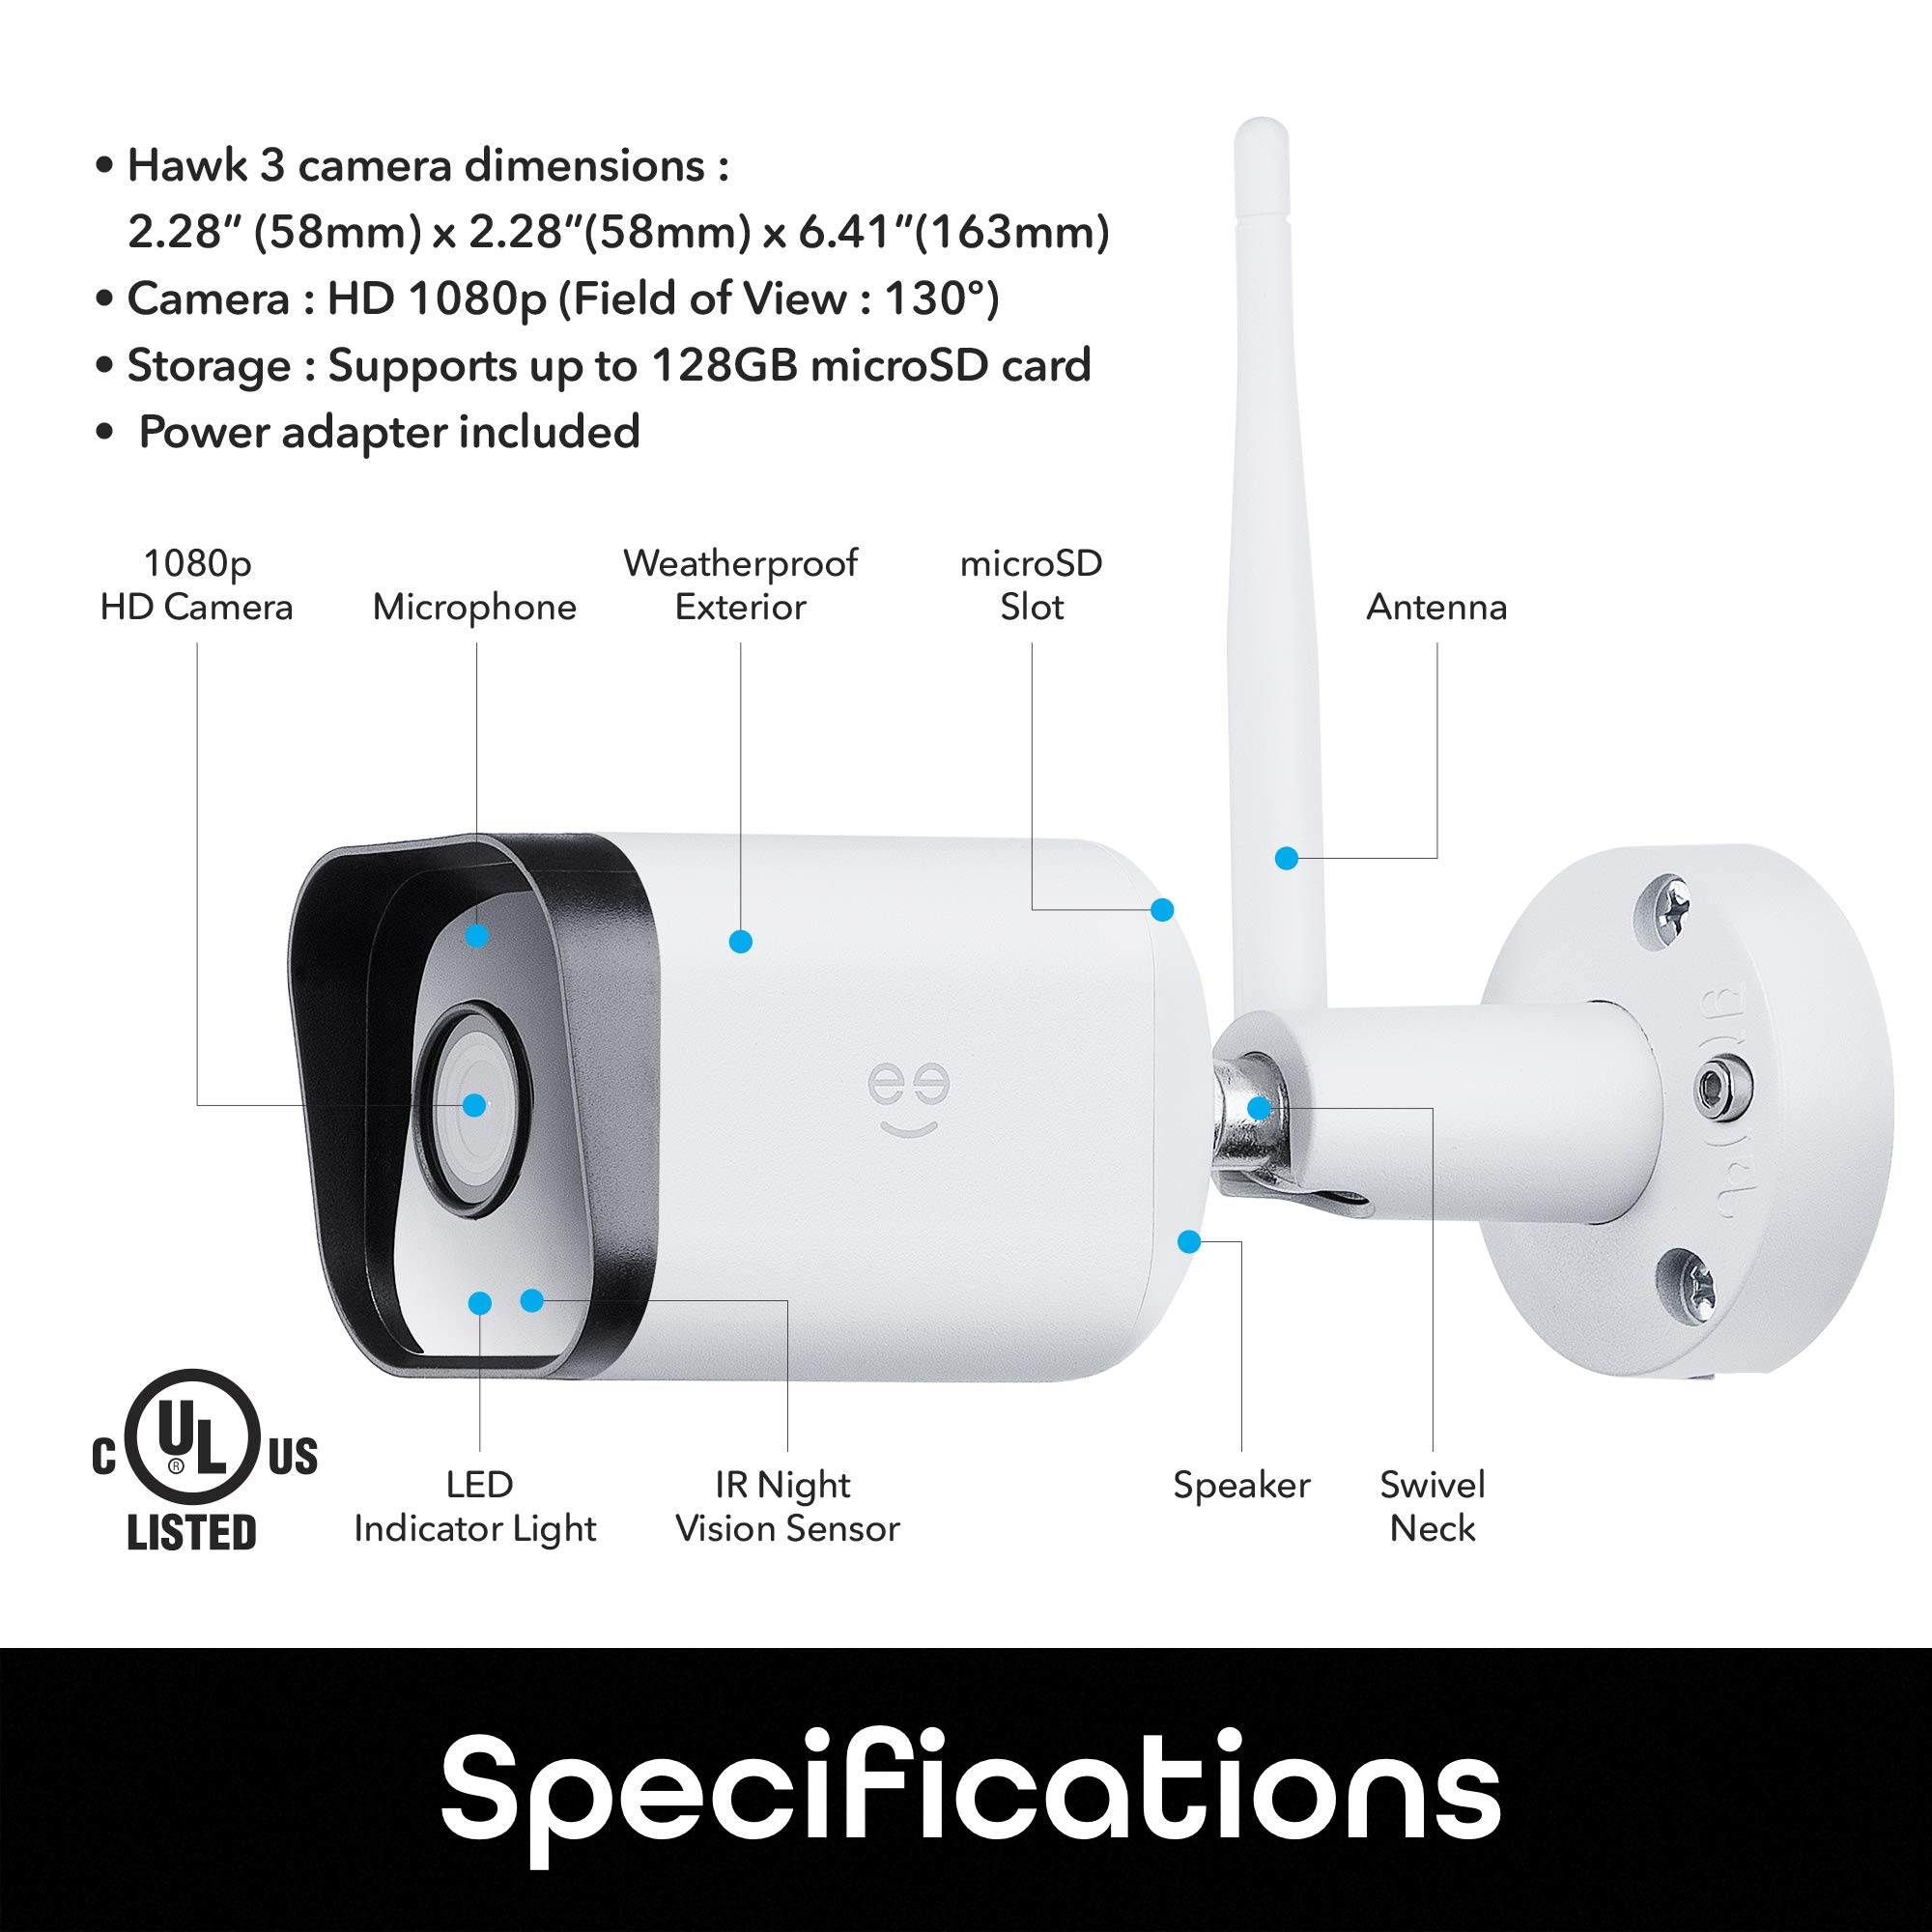 Geeni Hawk 3 HD 1080p Outdoor Security Camera, IP66 Weatherproof WiFi Surveillance with Night Vision, 2-Way Audio, and Motion Detection - Works with Alexa and Google Home, No Hub Required